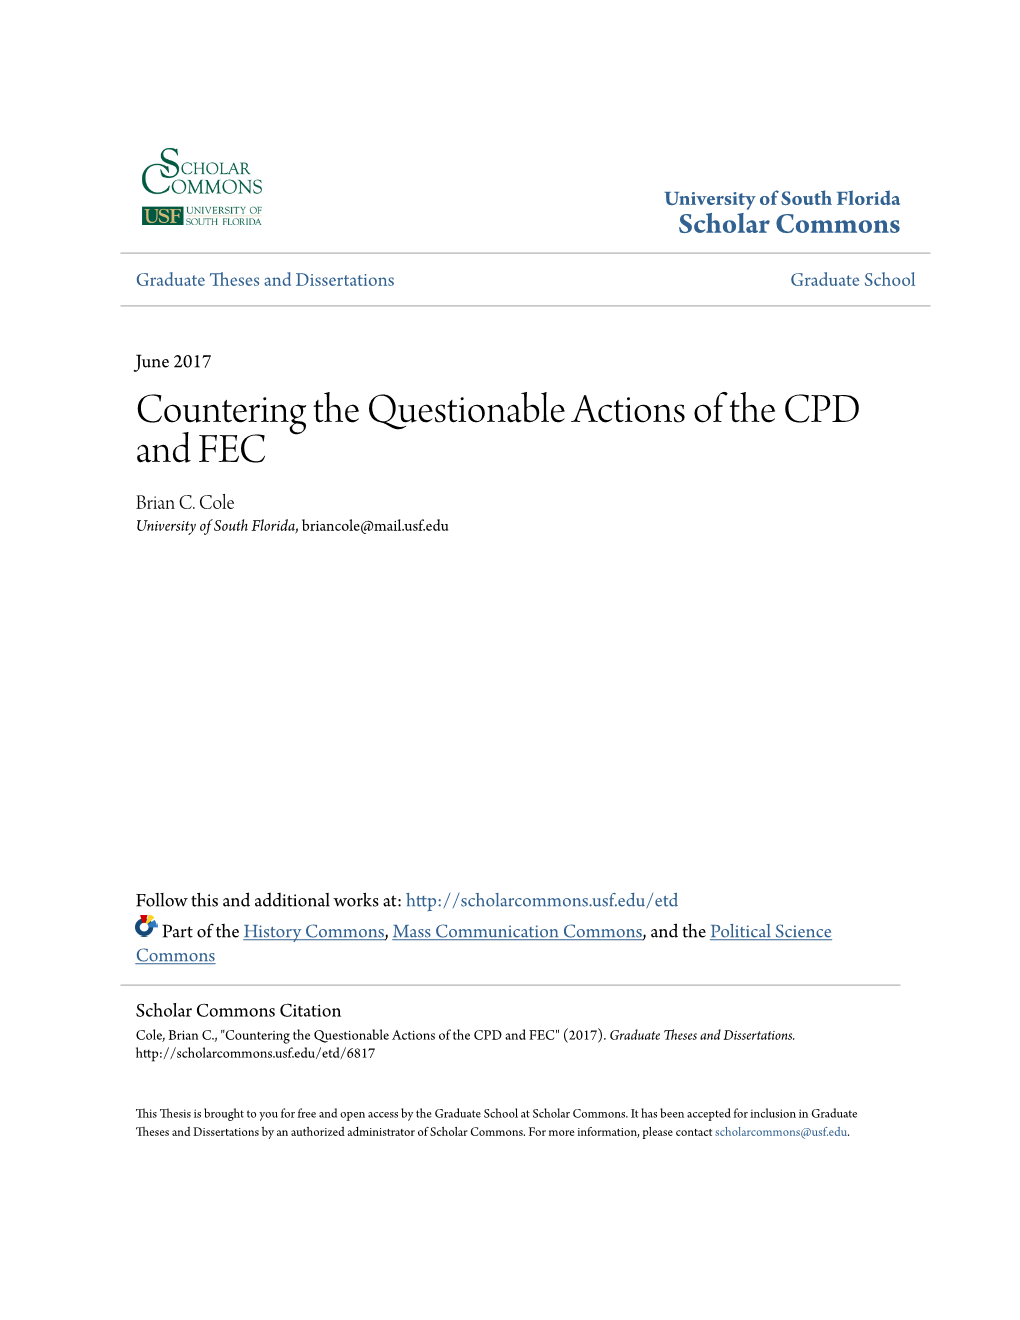 Countering the Questionable Actions of the CPD and FEC Brian C